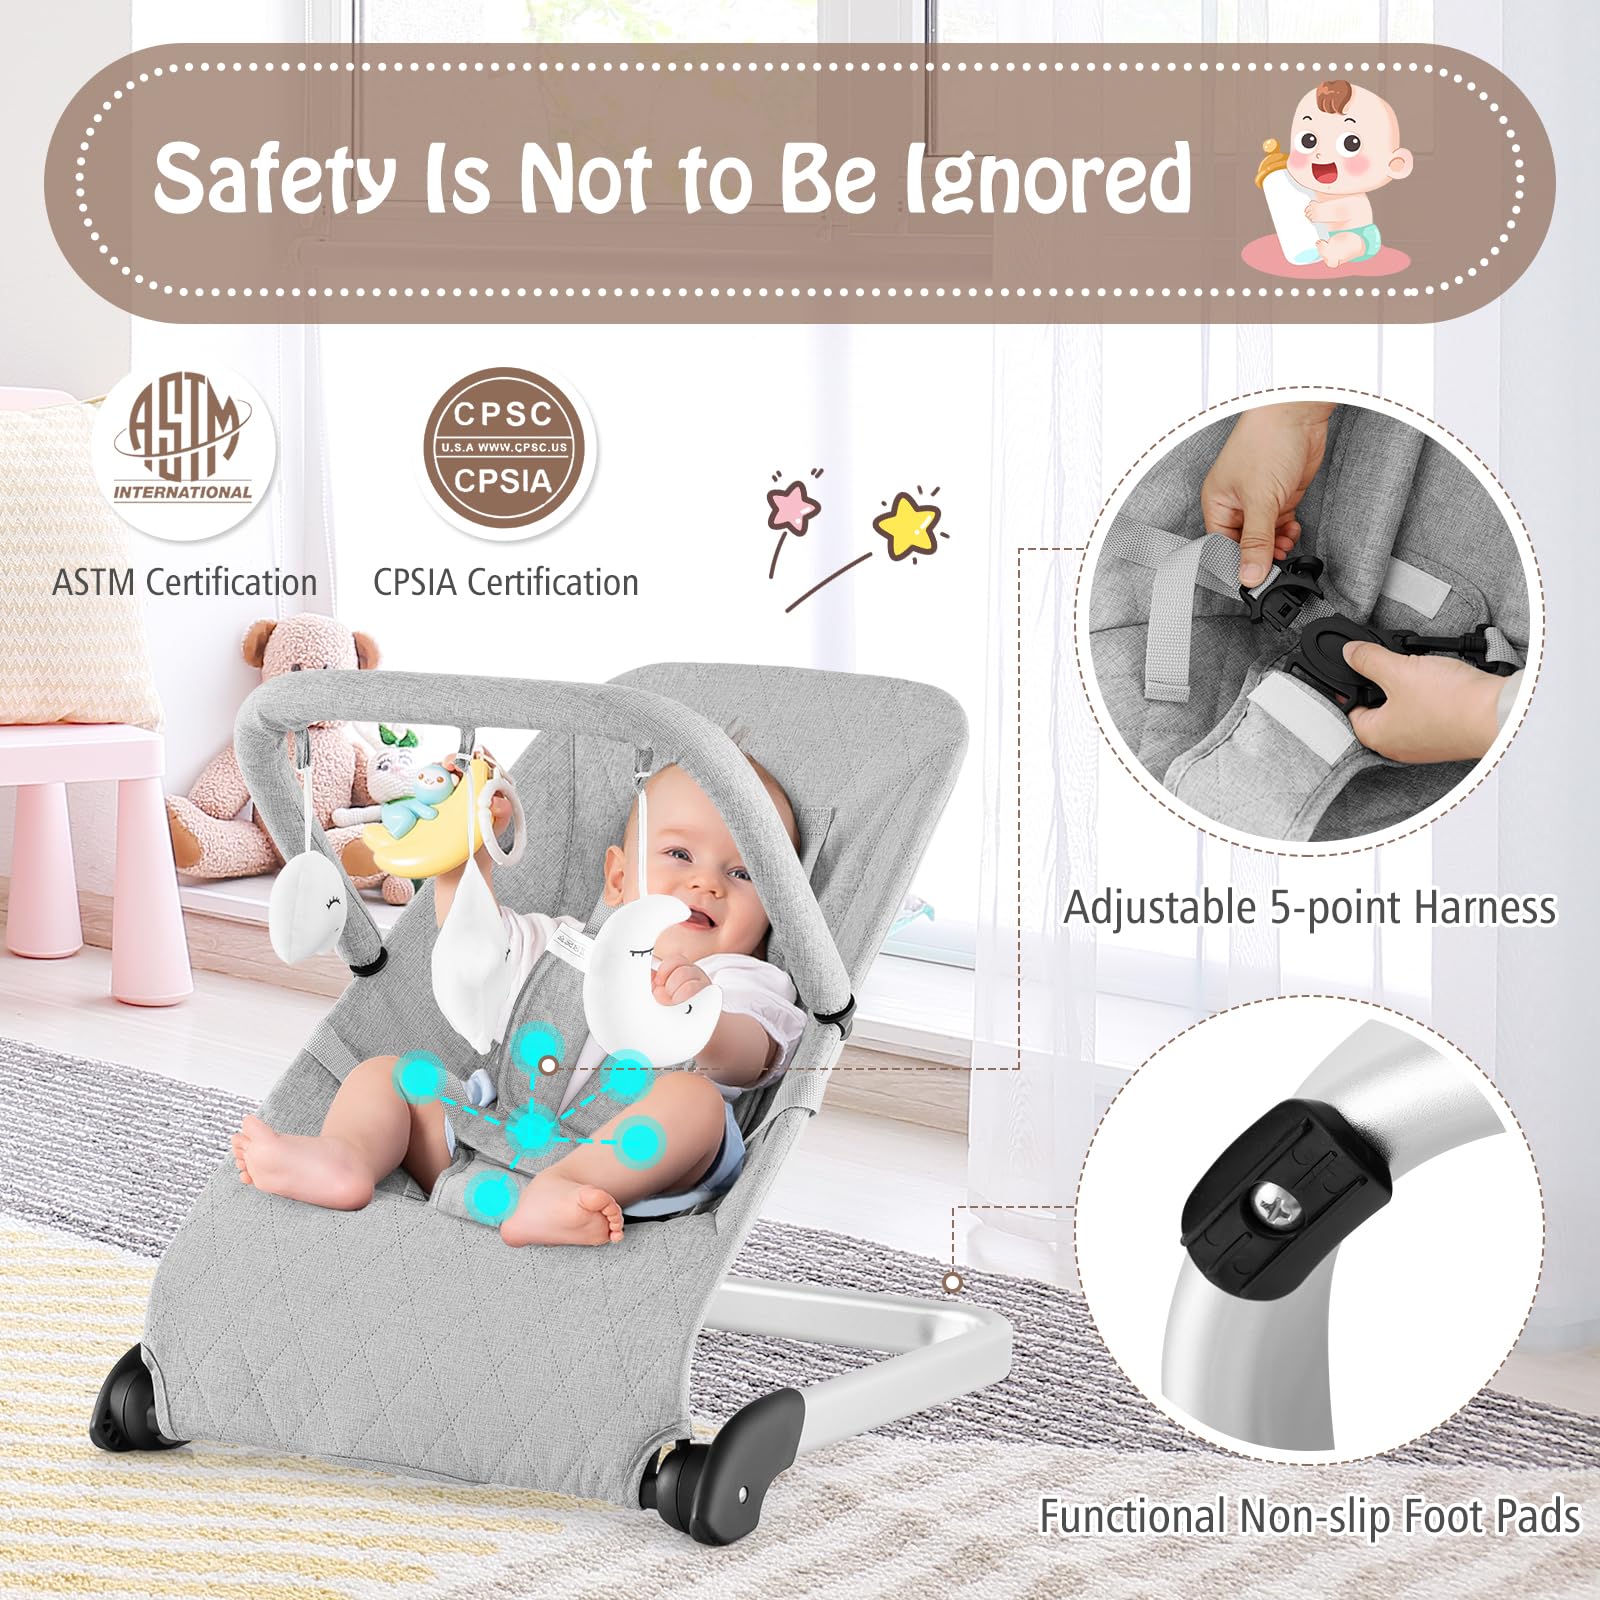 BABY JOY 2 in 1 Baby Bouncer, Portable Baby Rocker with 3-Point Harness,  Folding Stationary Seat Infant Bouncer for Babies, Newborns (Beige)